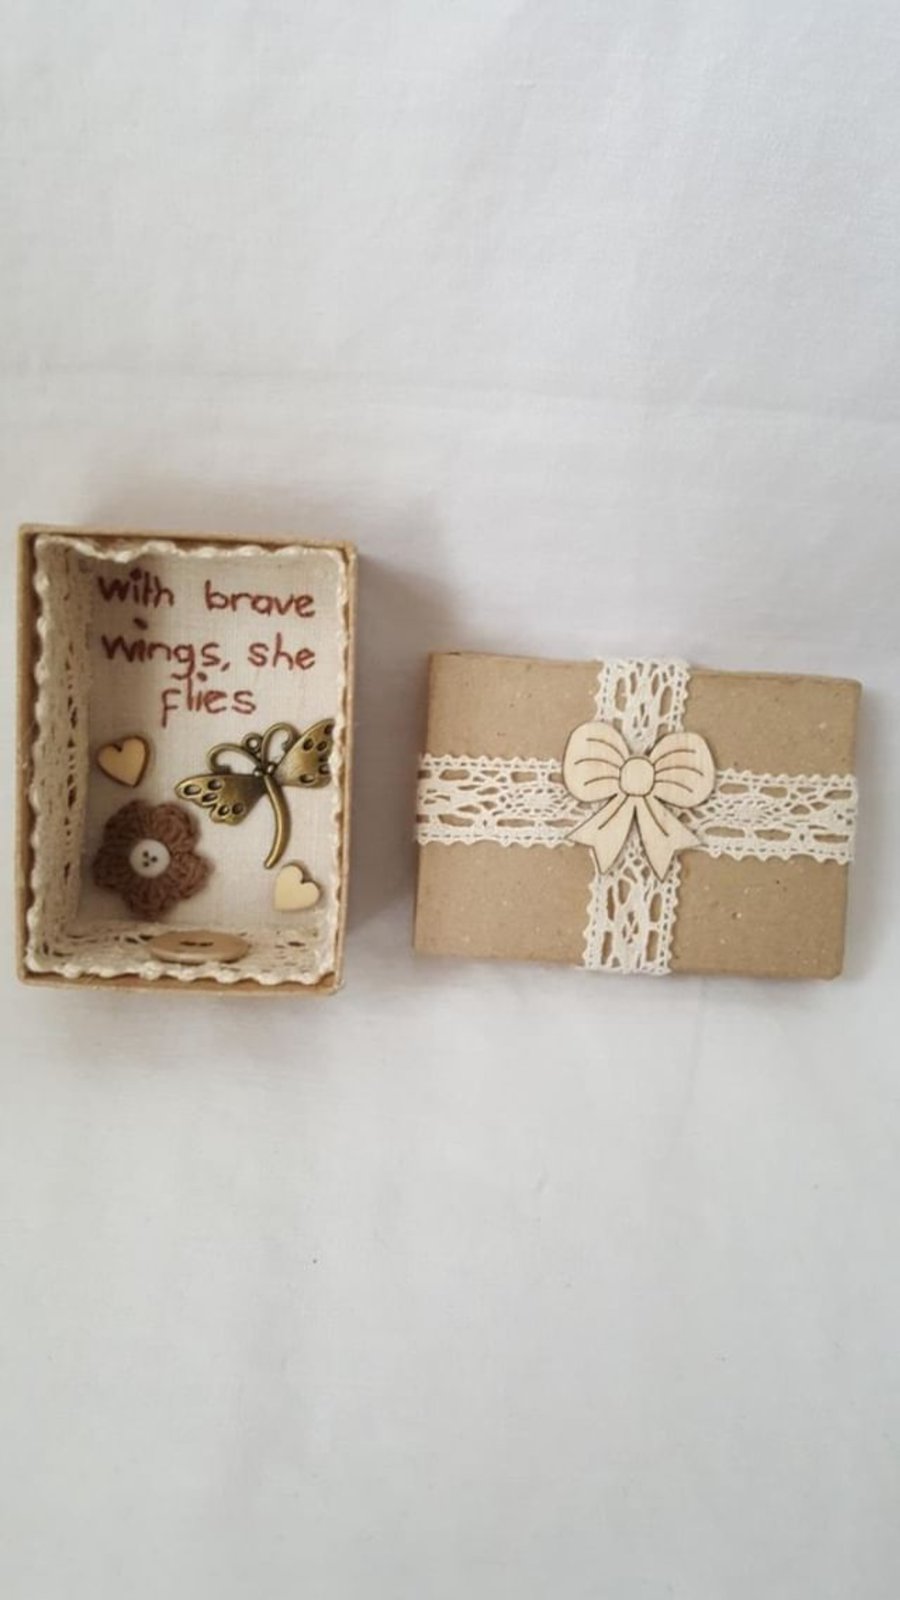 small miniature art diorama with a message 'with brave wings she flies'